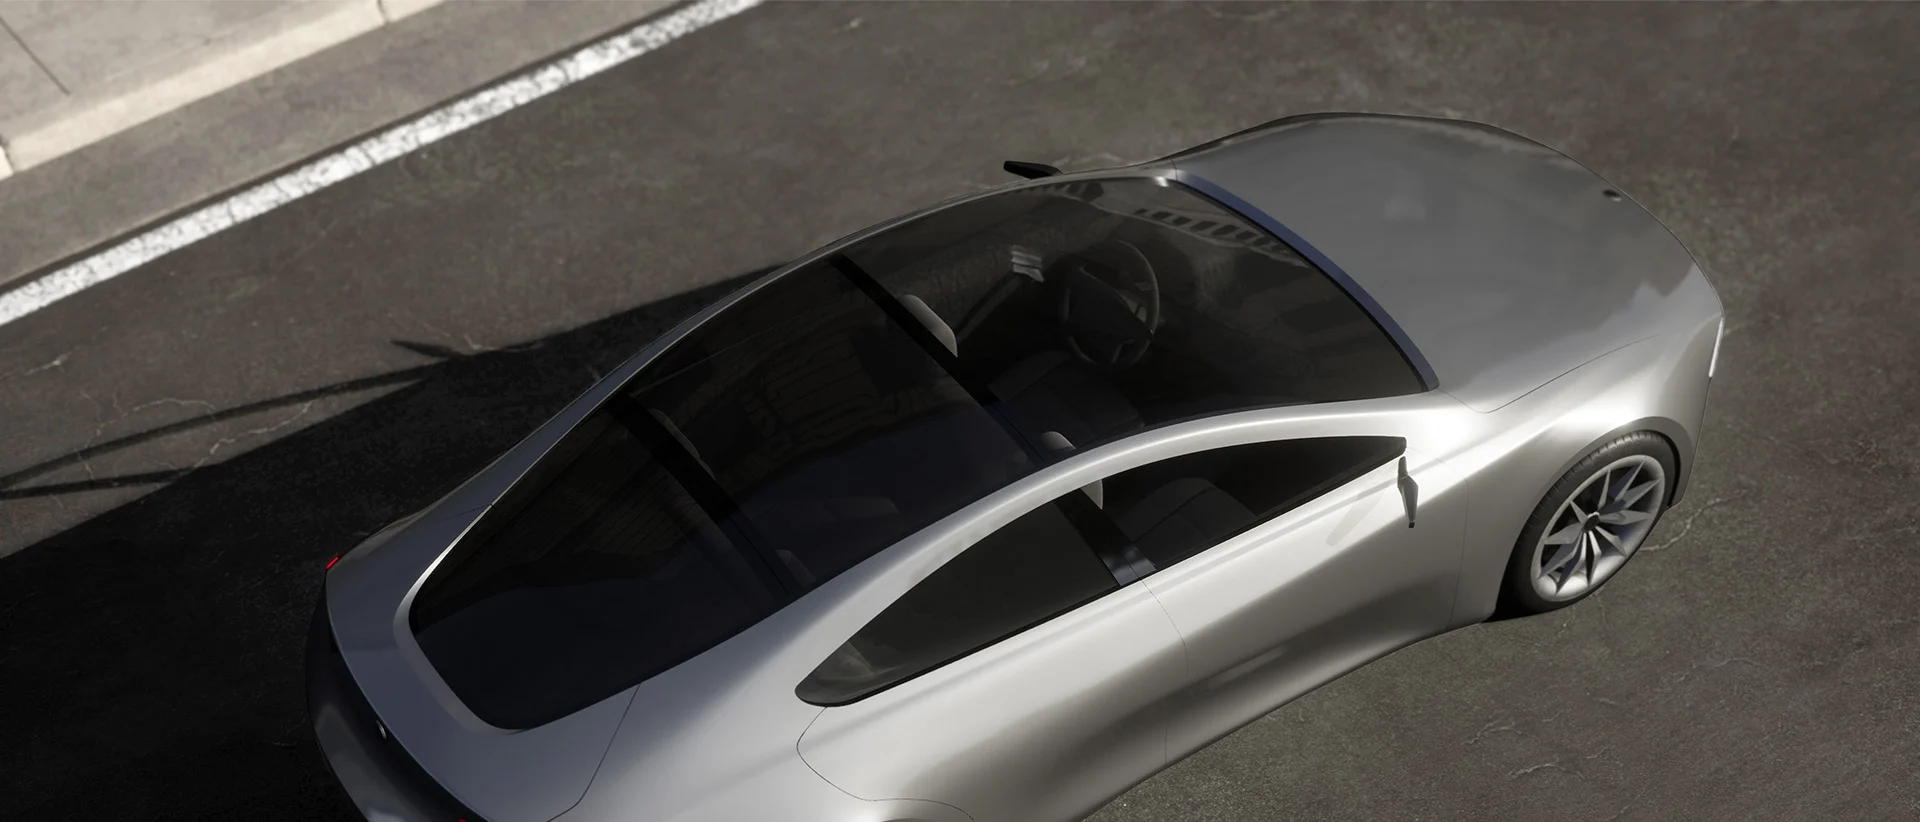 Car driving with panoramic roof glass reduces parts and improves design.